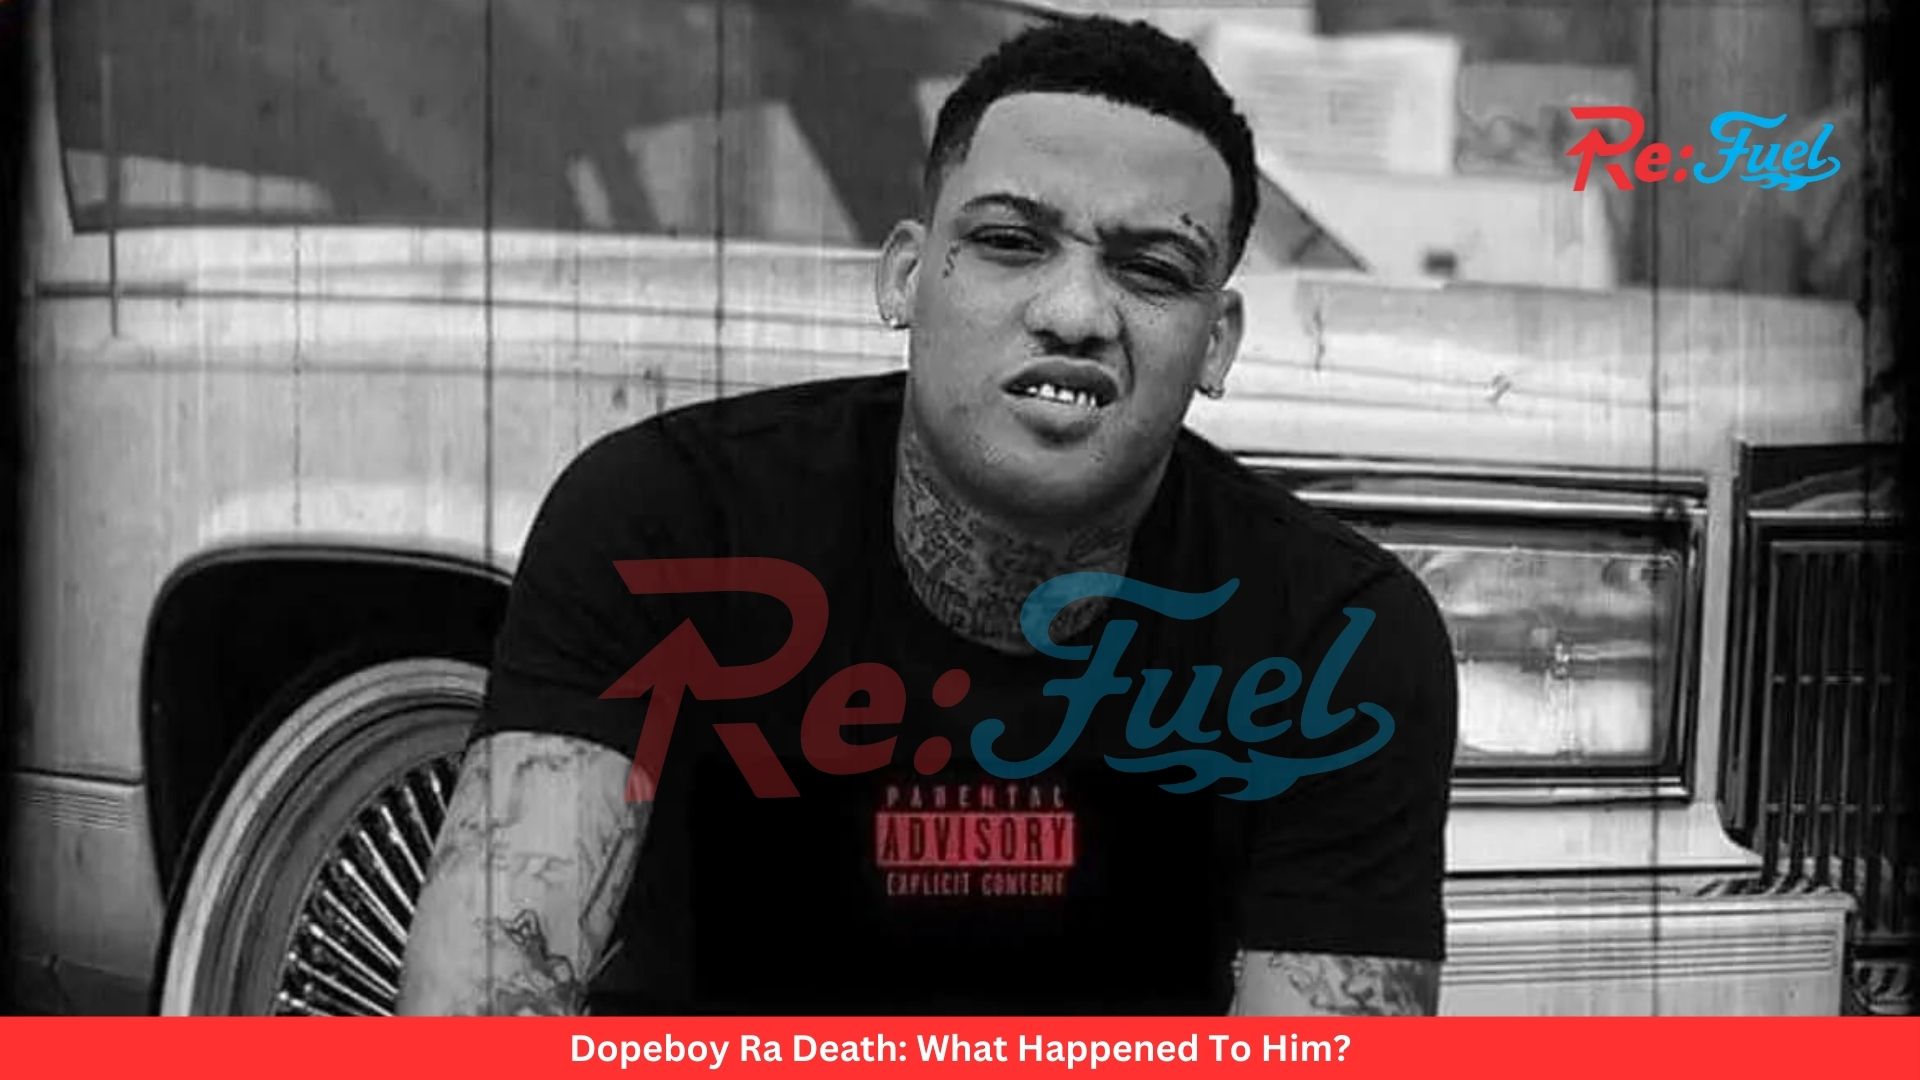 Dopeboy Ra Death: What Happened To Him?